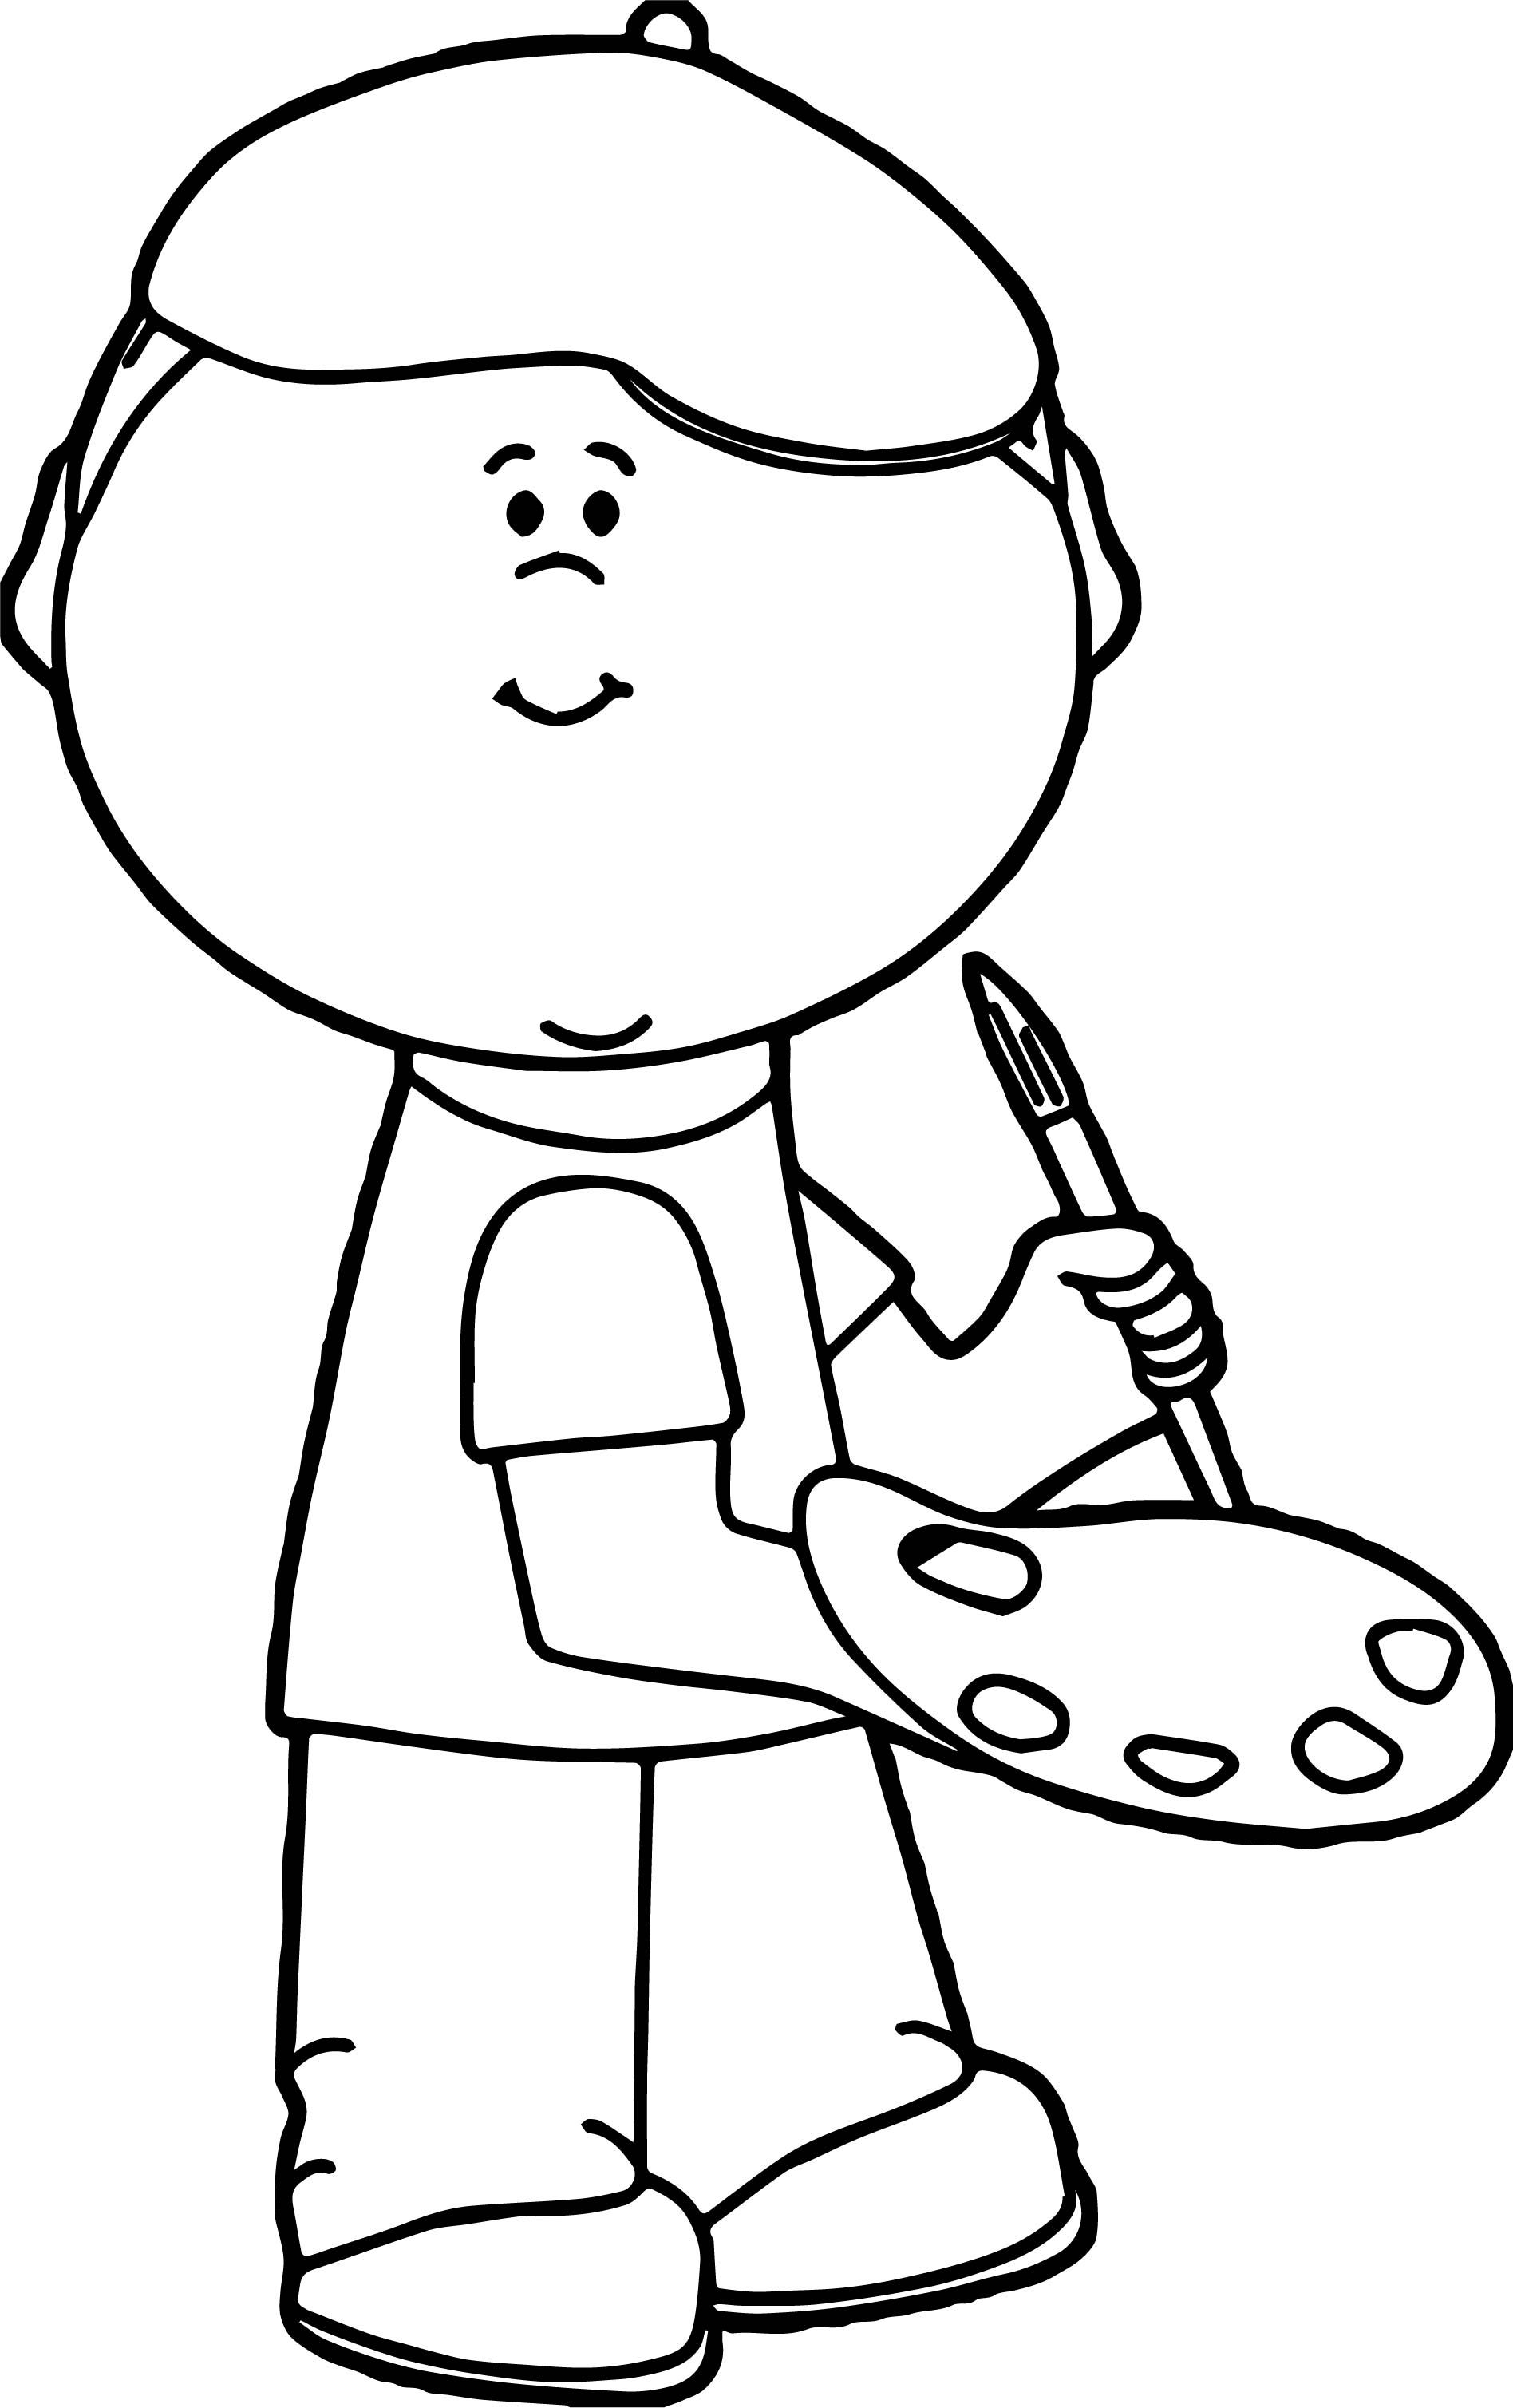 Painter 18 For Kids Coloring Page